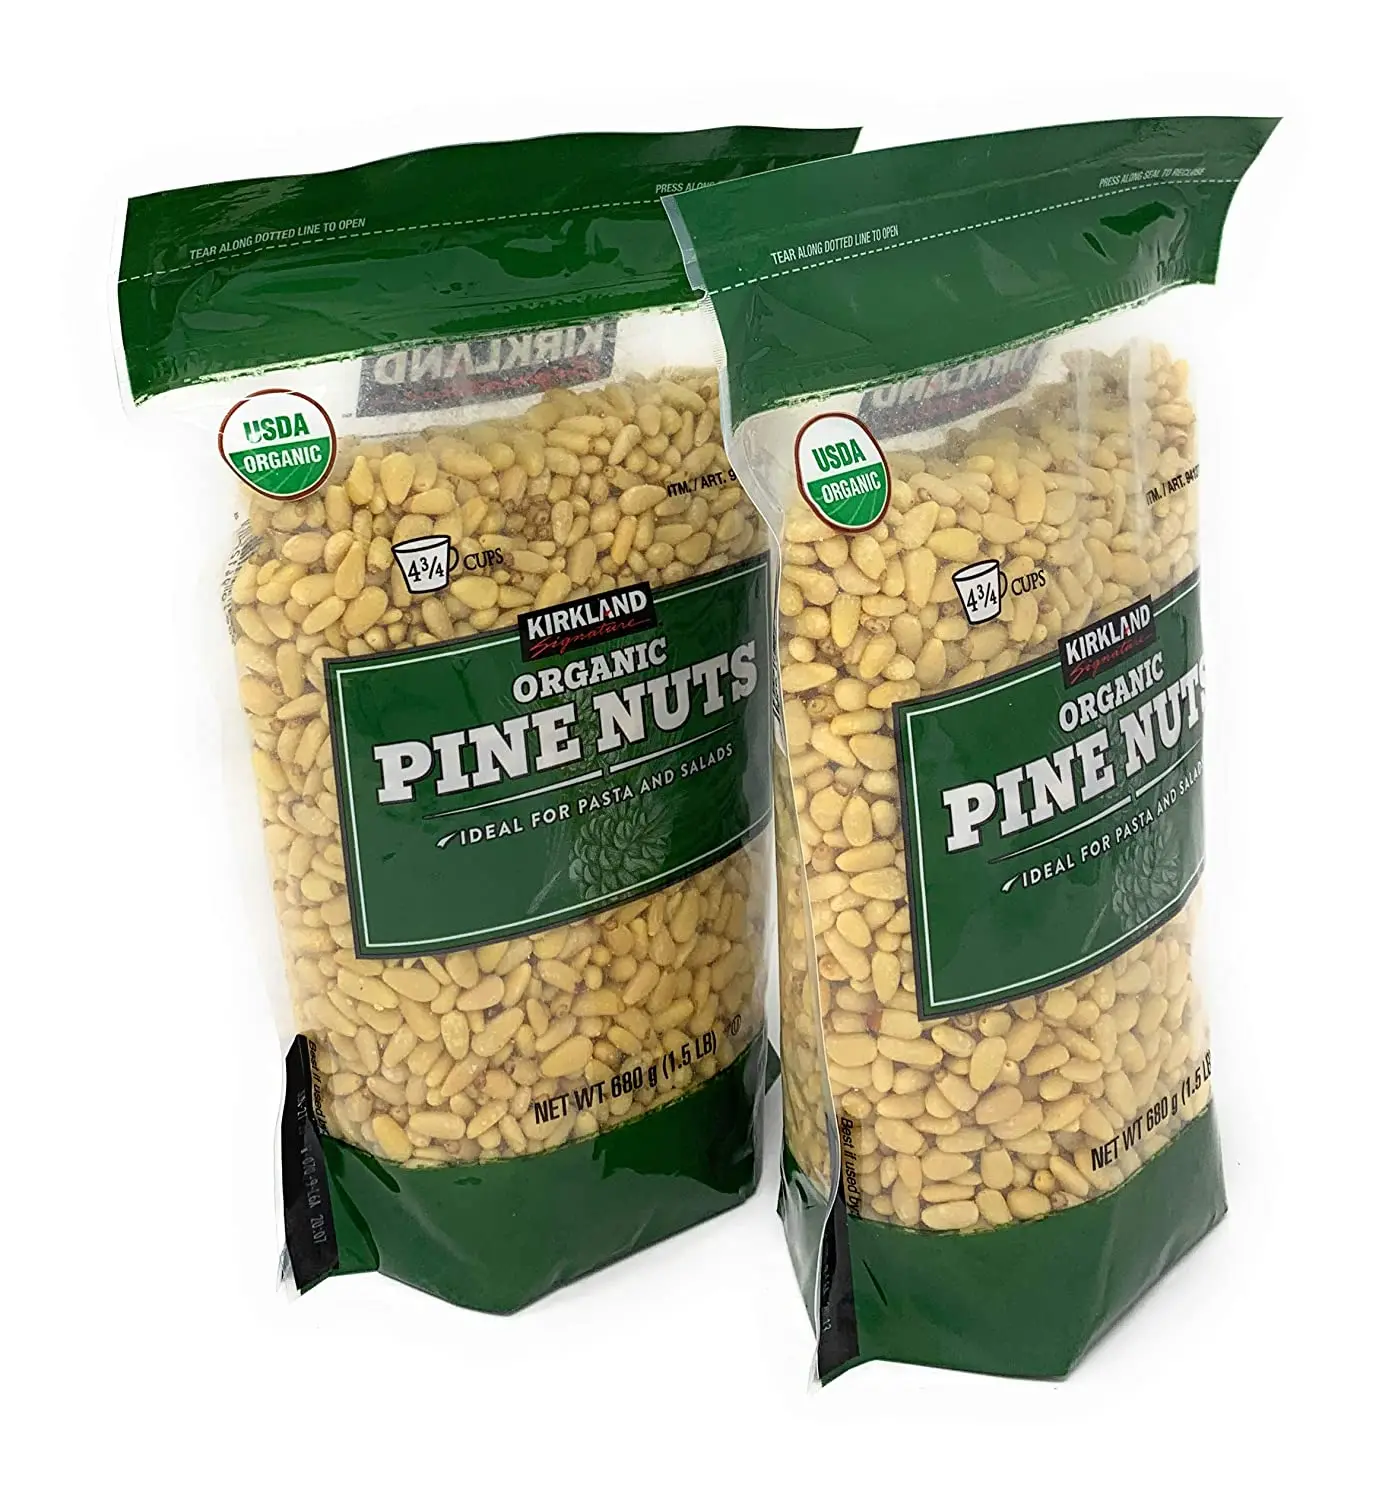 Top Quality Pine Nuts Wholesale Organic Pine Nuts Kernels with Shells 100% clean raw pine nuts